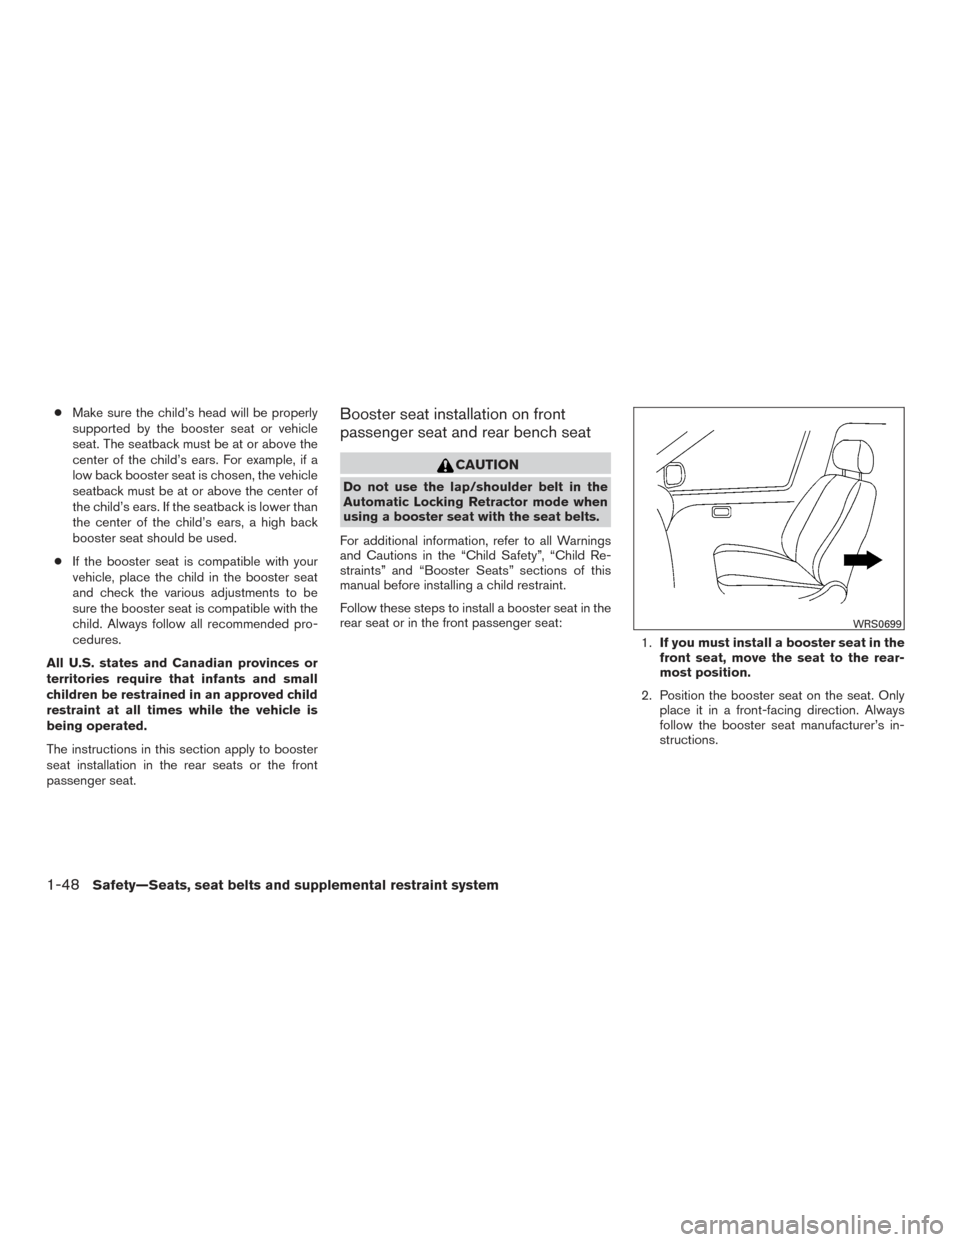 NISSAN TITAN 2015 1.G Manual PDF ●Make sure the child’s head will be properly
supported by the booster seat or vehicle
seat. The seatback must be at or above the
center of the child’s ears. For example, if a
low back booster se